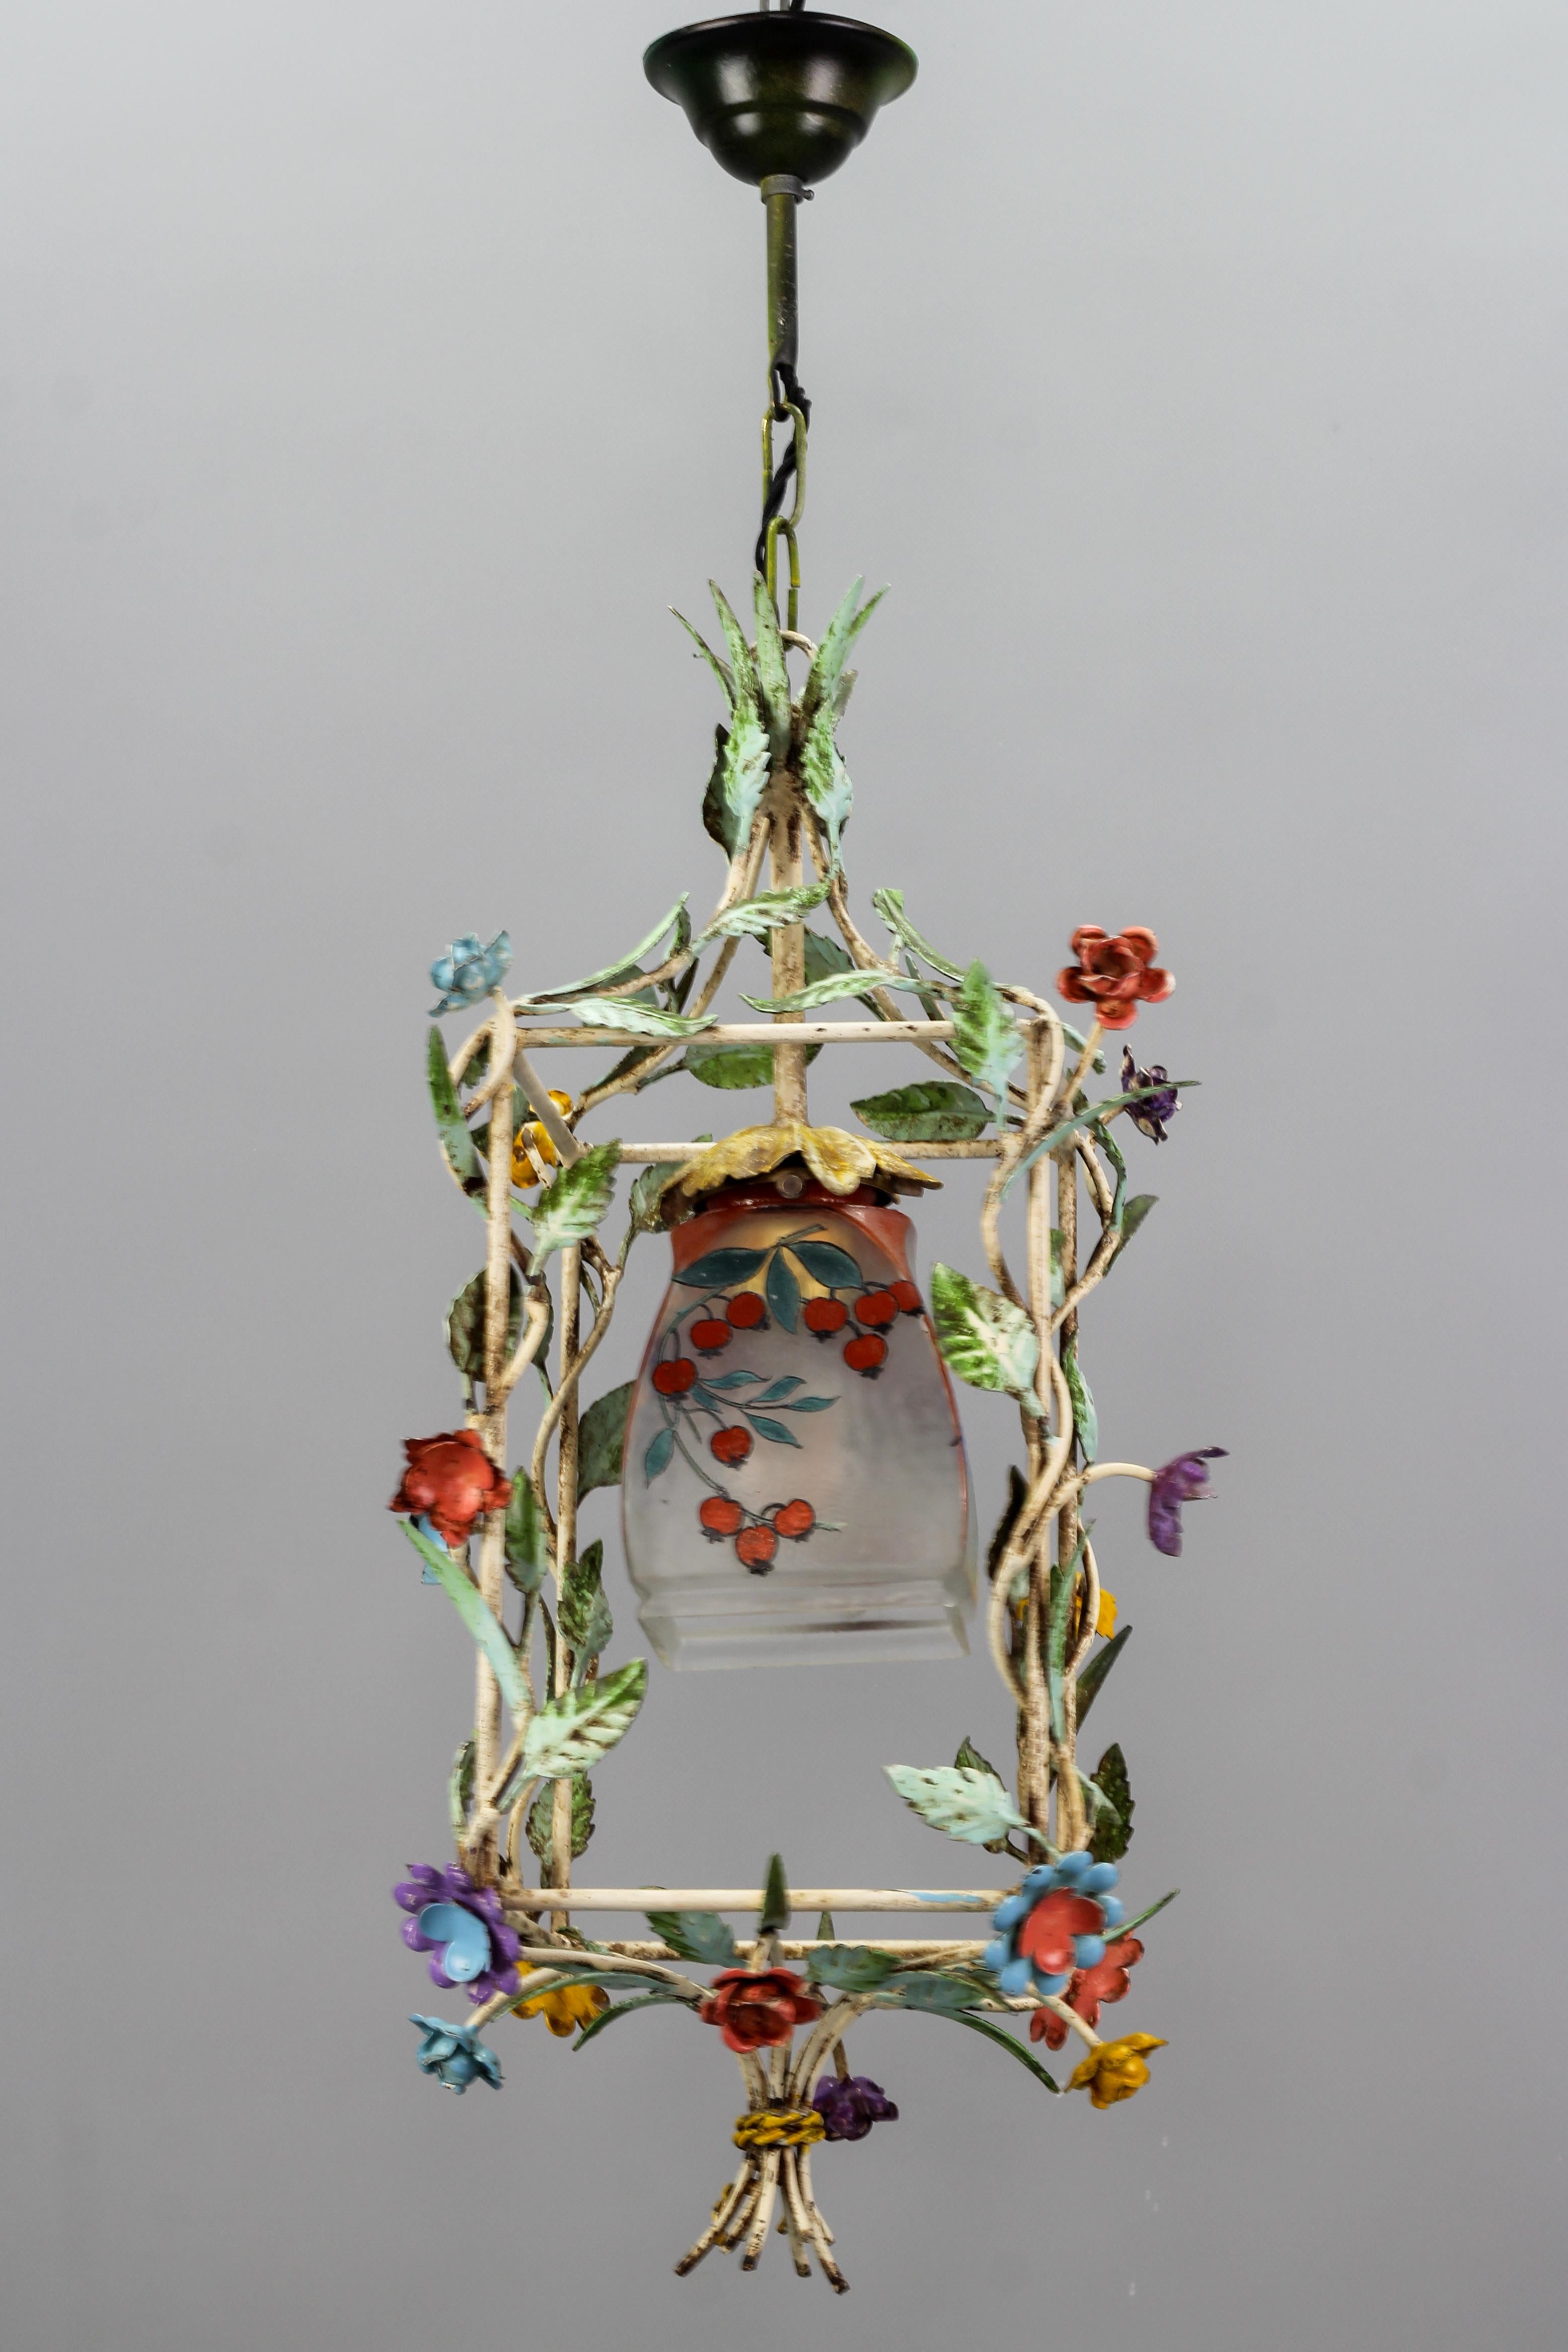 Mid-20th Century French Tole and Glass Polychrome Pastel Flower Cage Pendant Light, 1950s For Sale